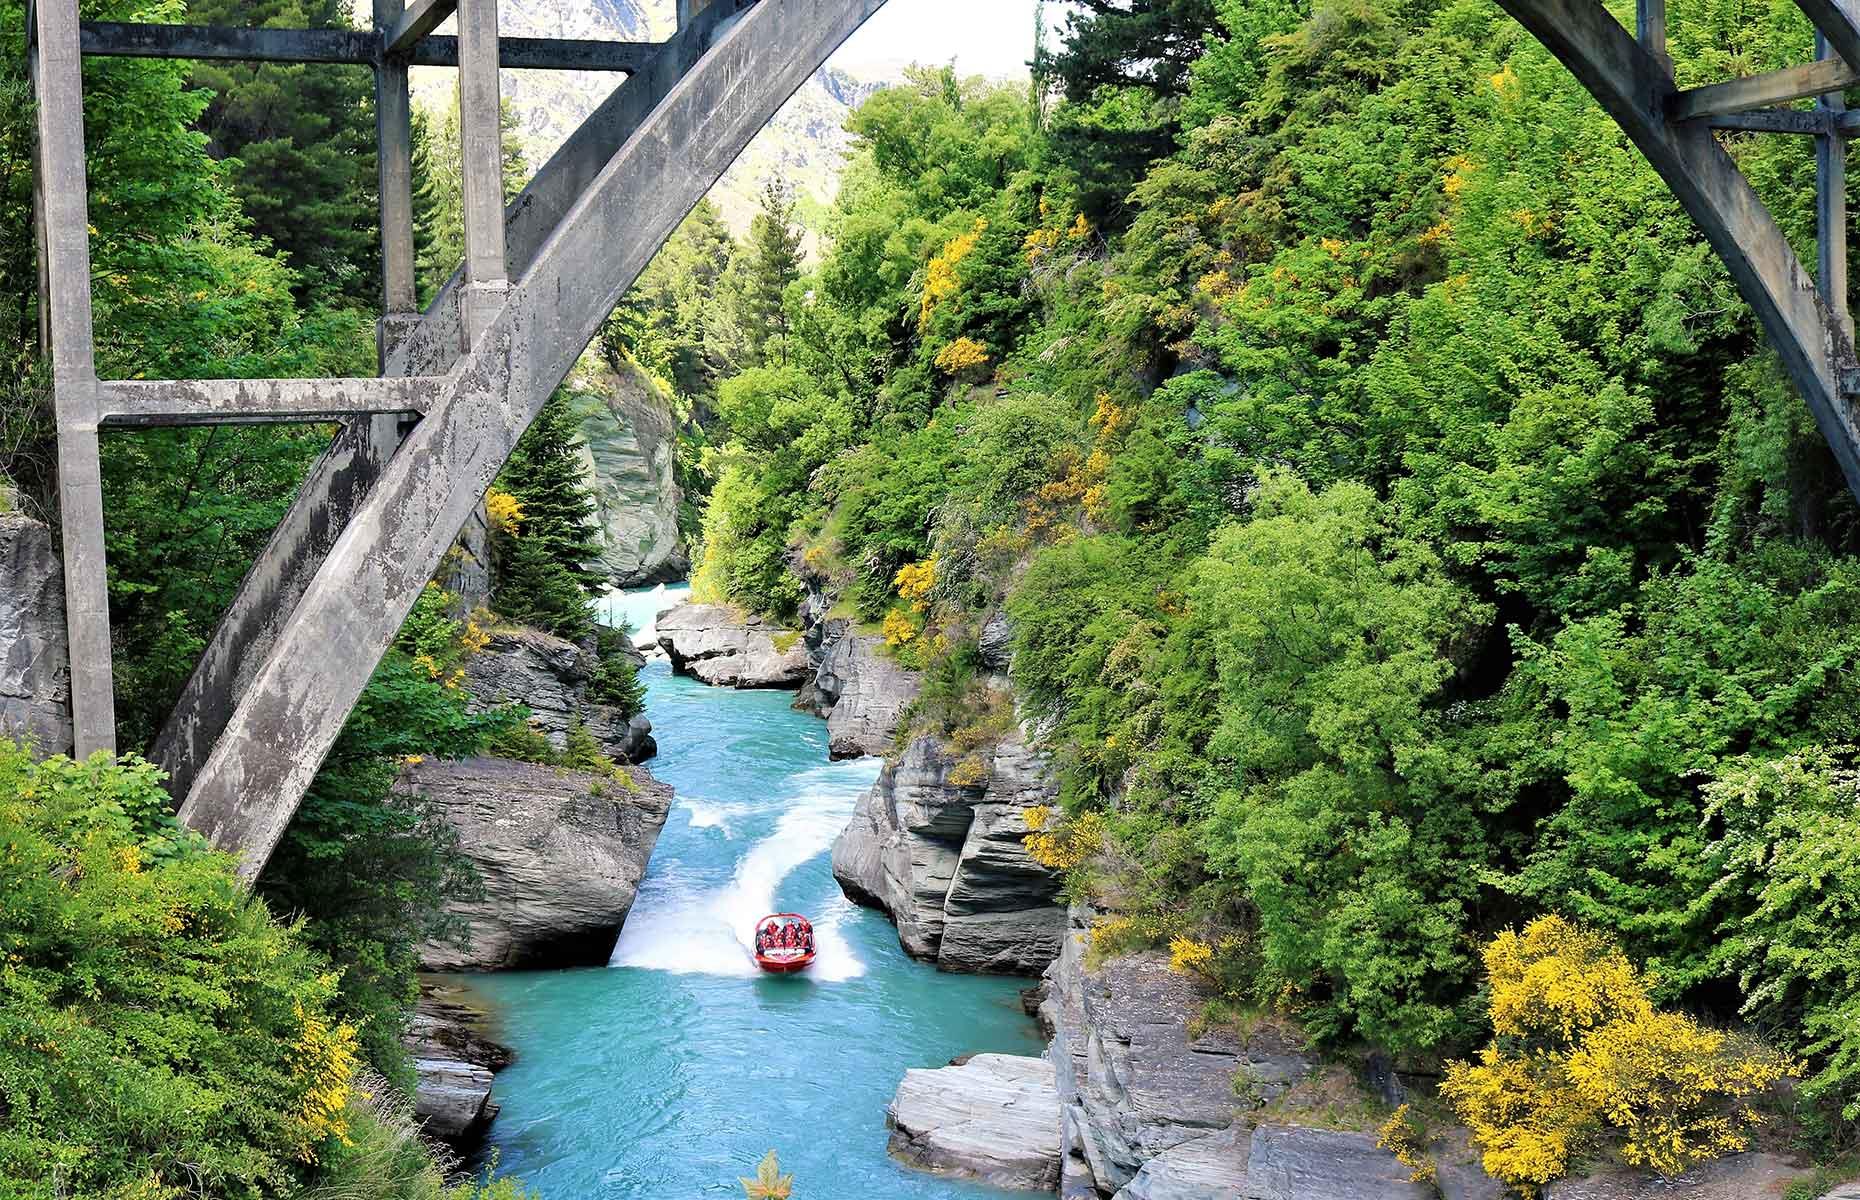 <p>The unbelievably blue waters of the fast-flowing Shotover River are a mesmerising spot for jet-boating on the <a href="https://www.shotoverjet.com/">Shotover Jet</a>. Your heart is in your mouth as you race through the rocky and narrow canyon, skimming rocks and spinning through sharp turns. The jet is owned by the Ngāi Tahu, the Māori people of this land, and is the only company allowed to operate in this area of the river.</p>